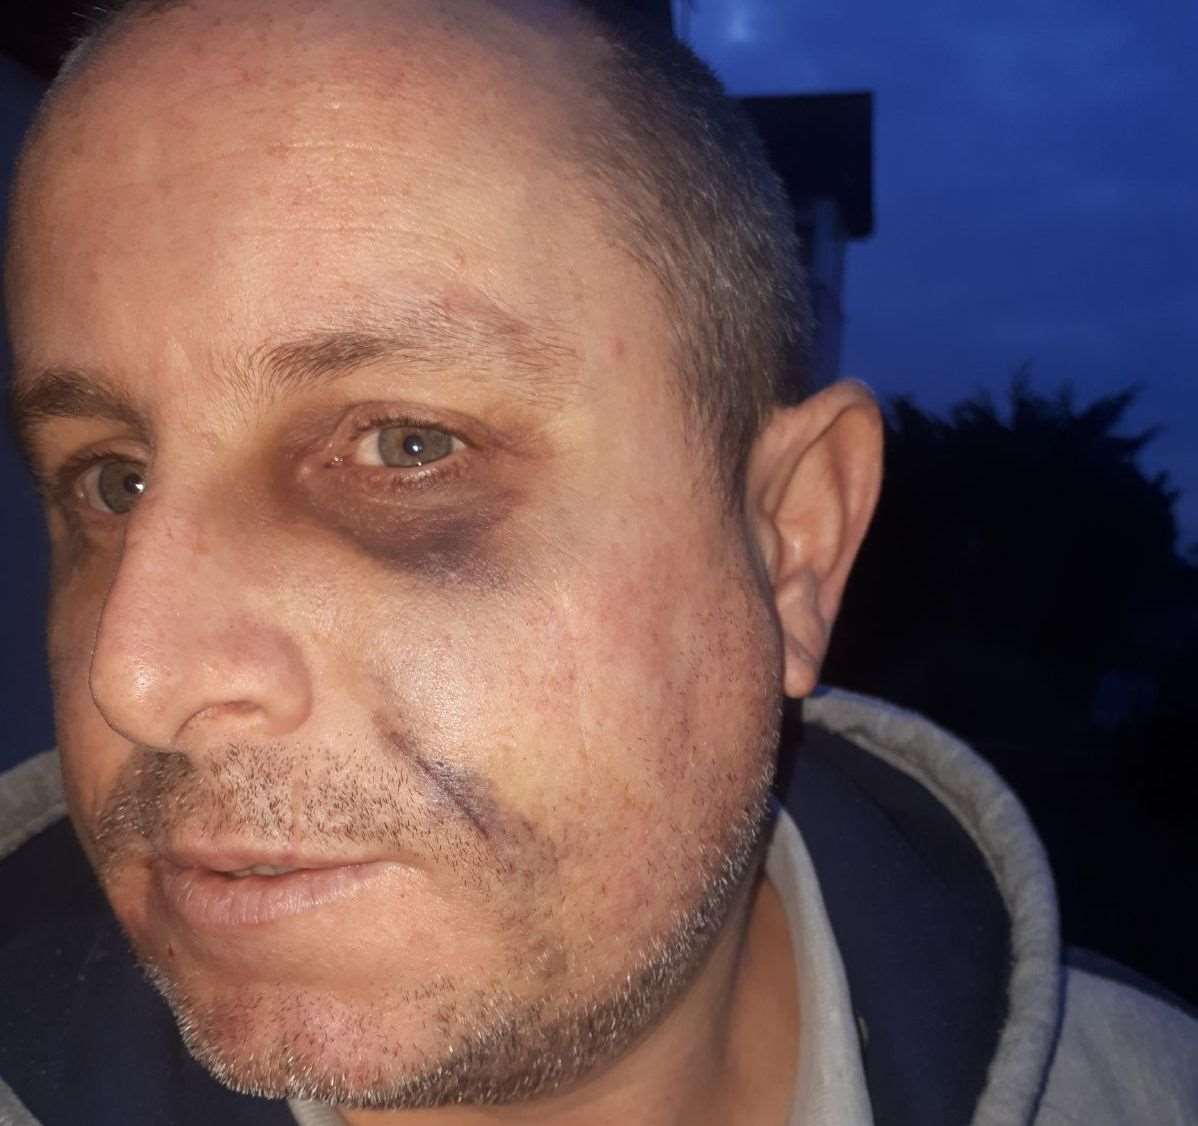 Luke Earl, the day after he was attacked (1221032)